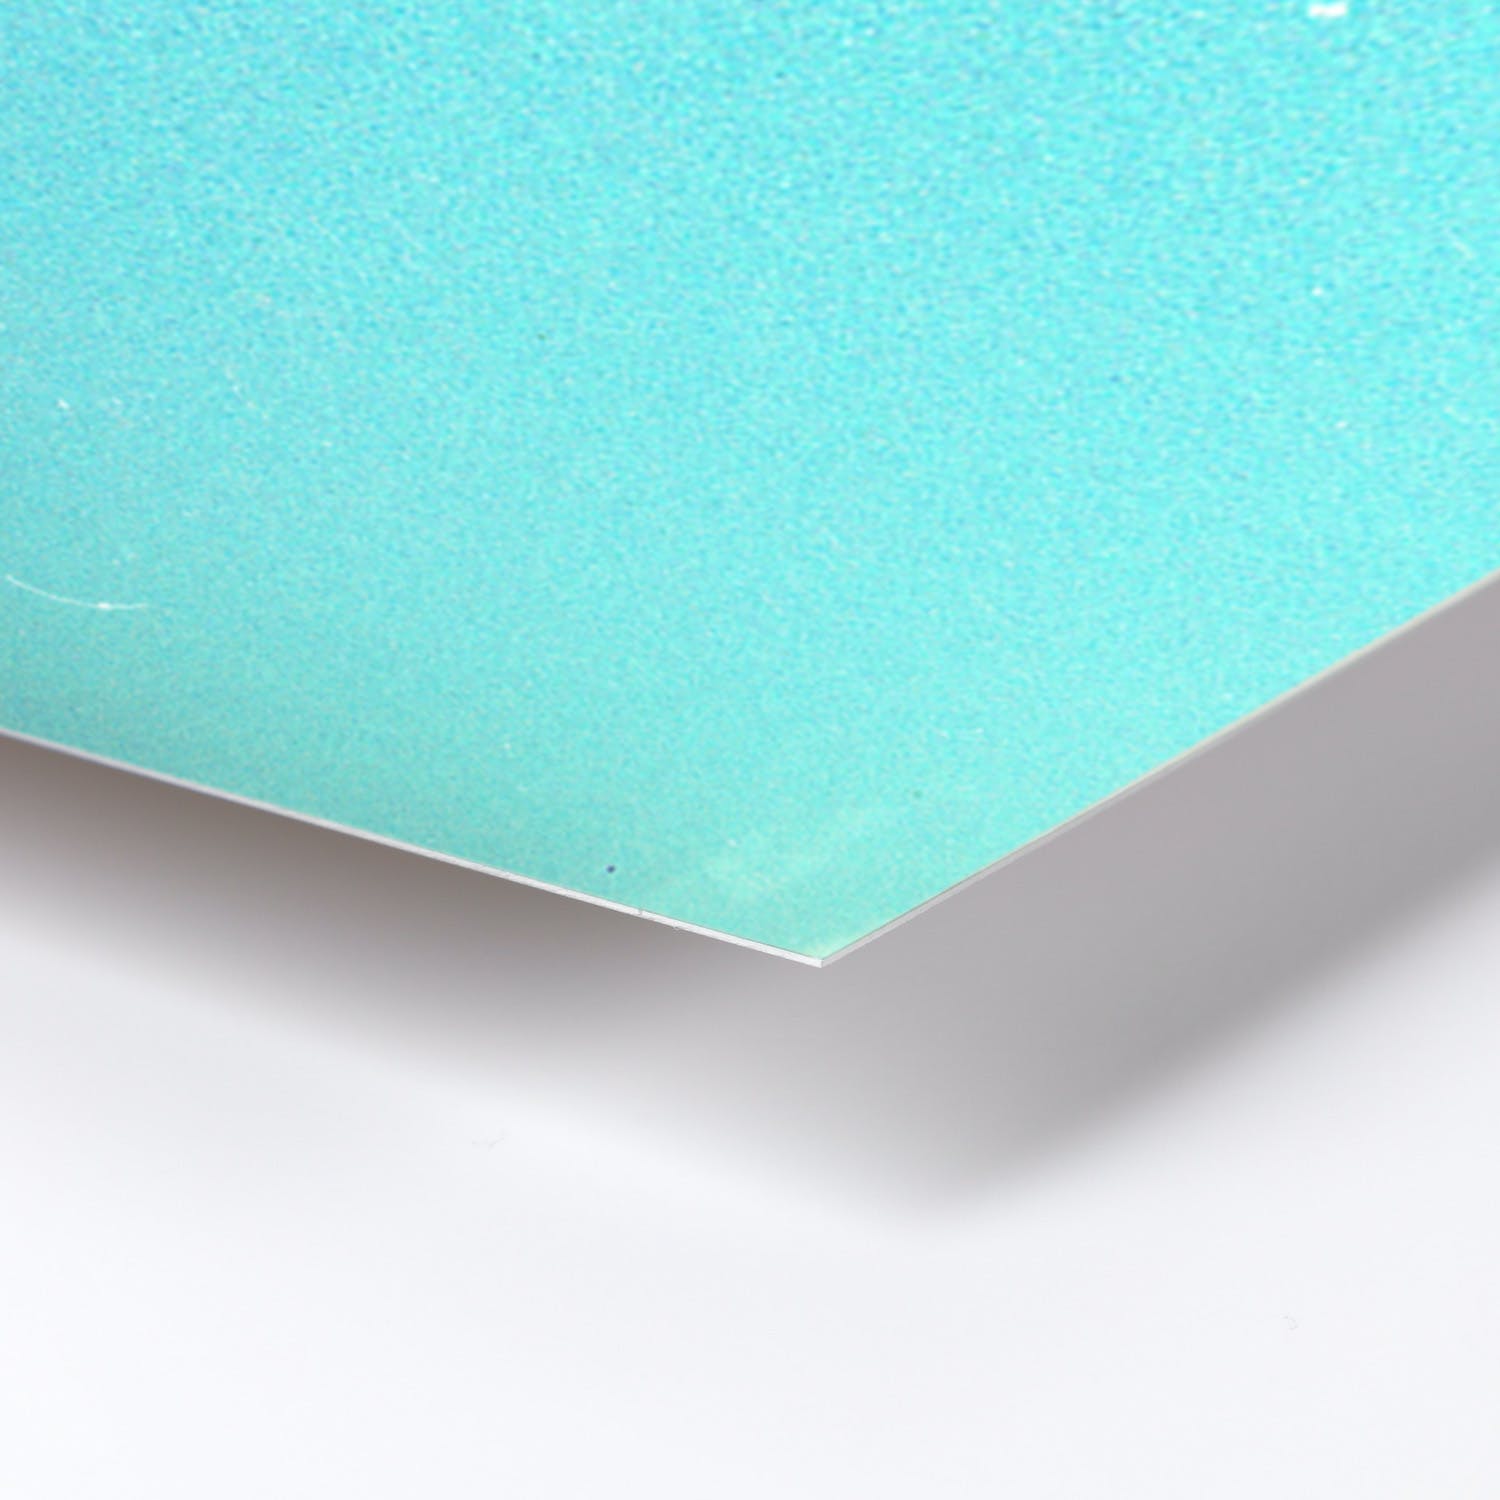 Close-up of light blue textured surface on paper or cardstock.